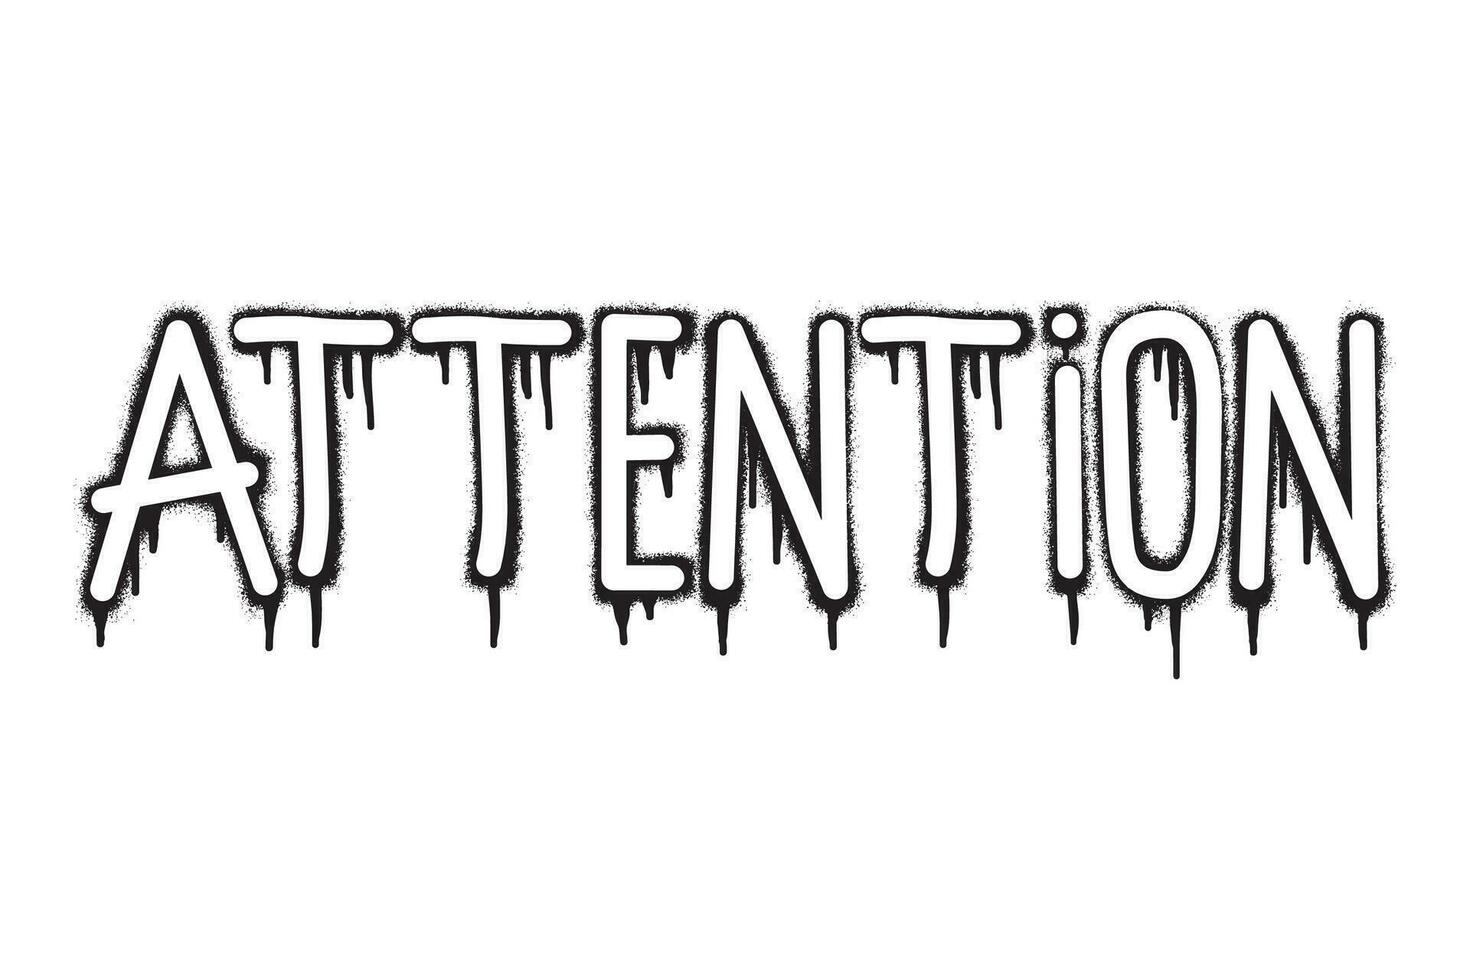 Attention text stencil graffiti with spray paint art vector